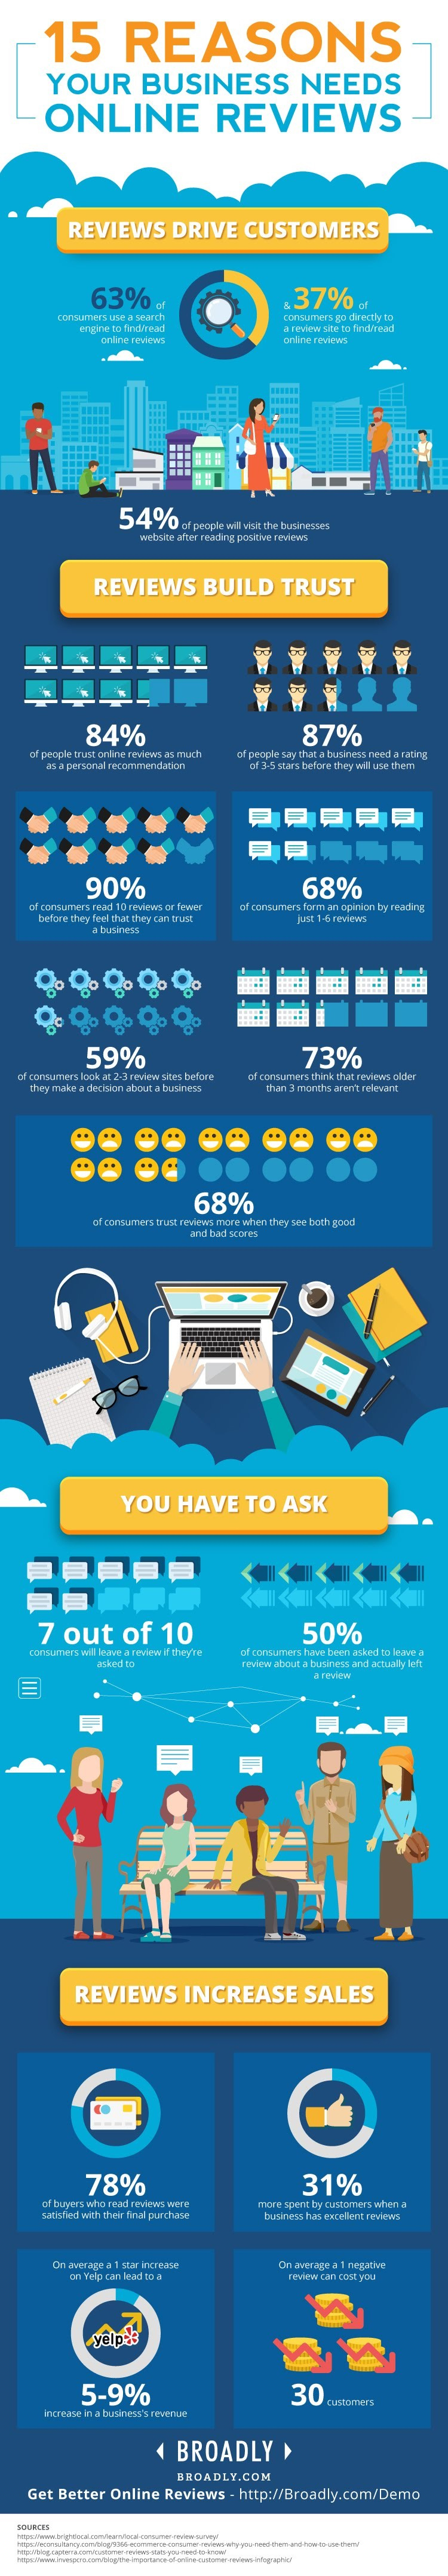 Top 15 Statistics On How Online Reviews Can Make Or Break Your Business